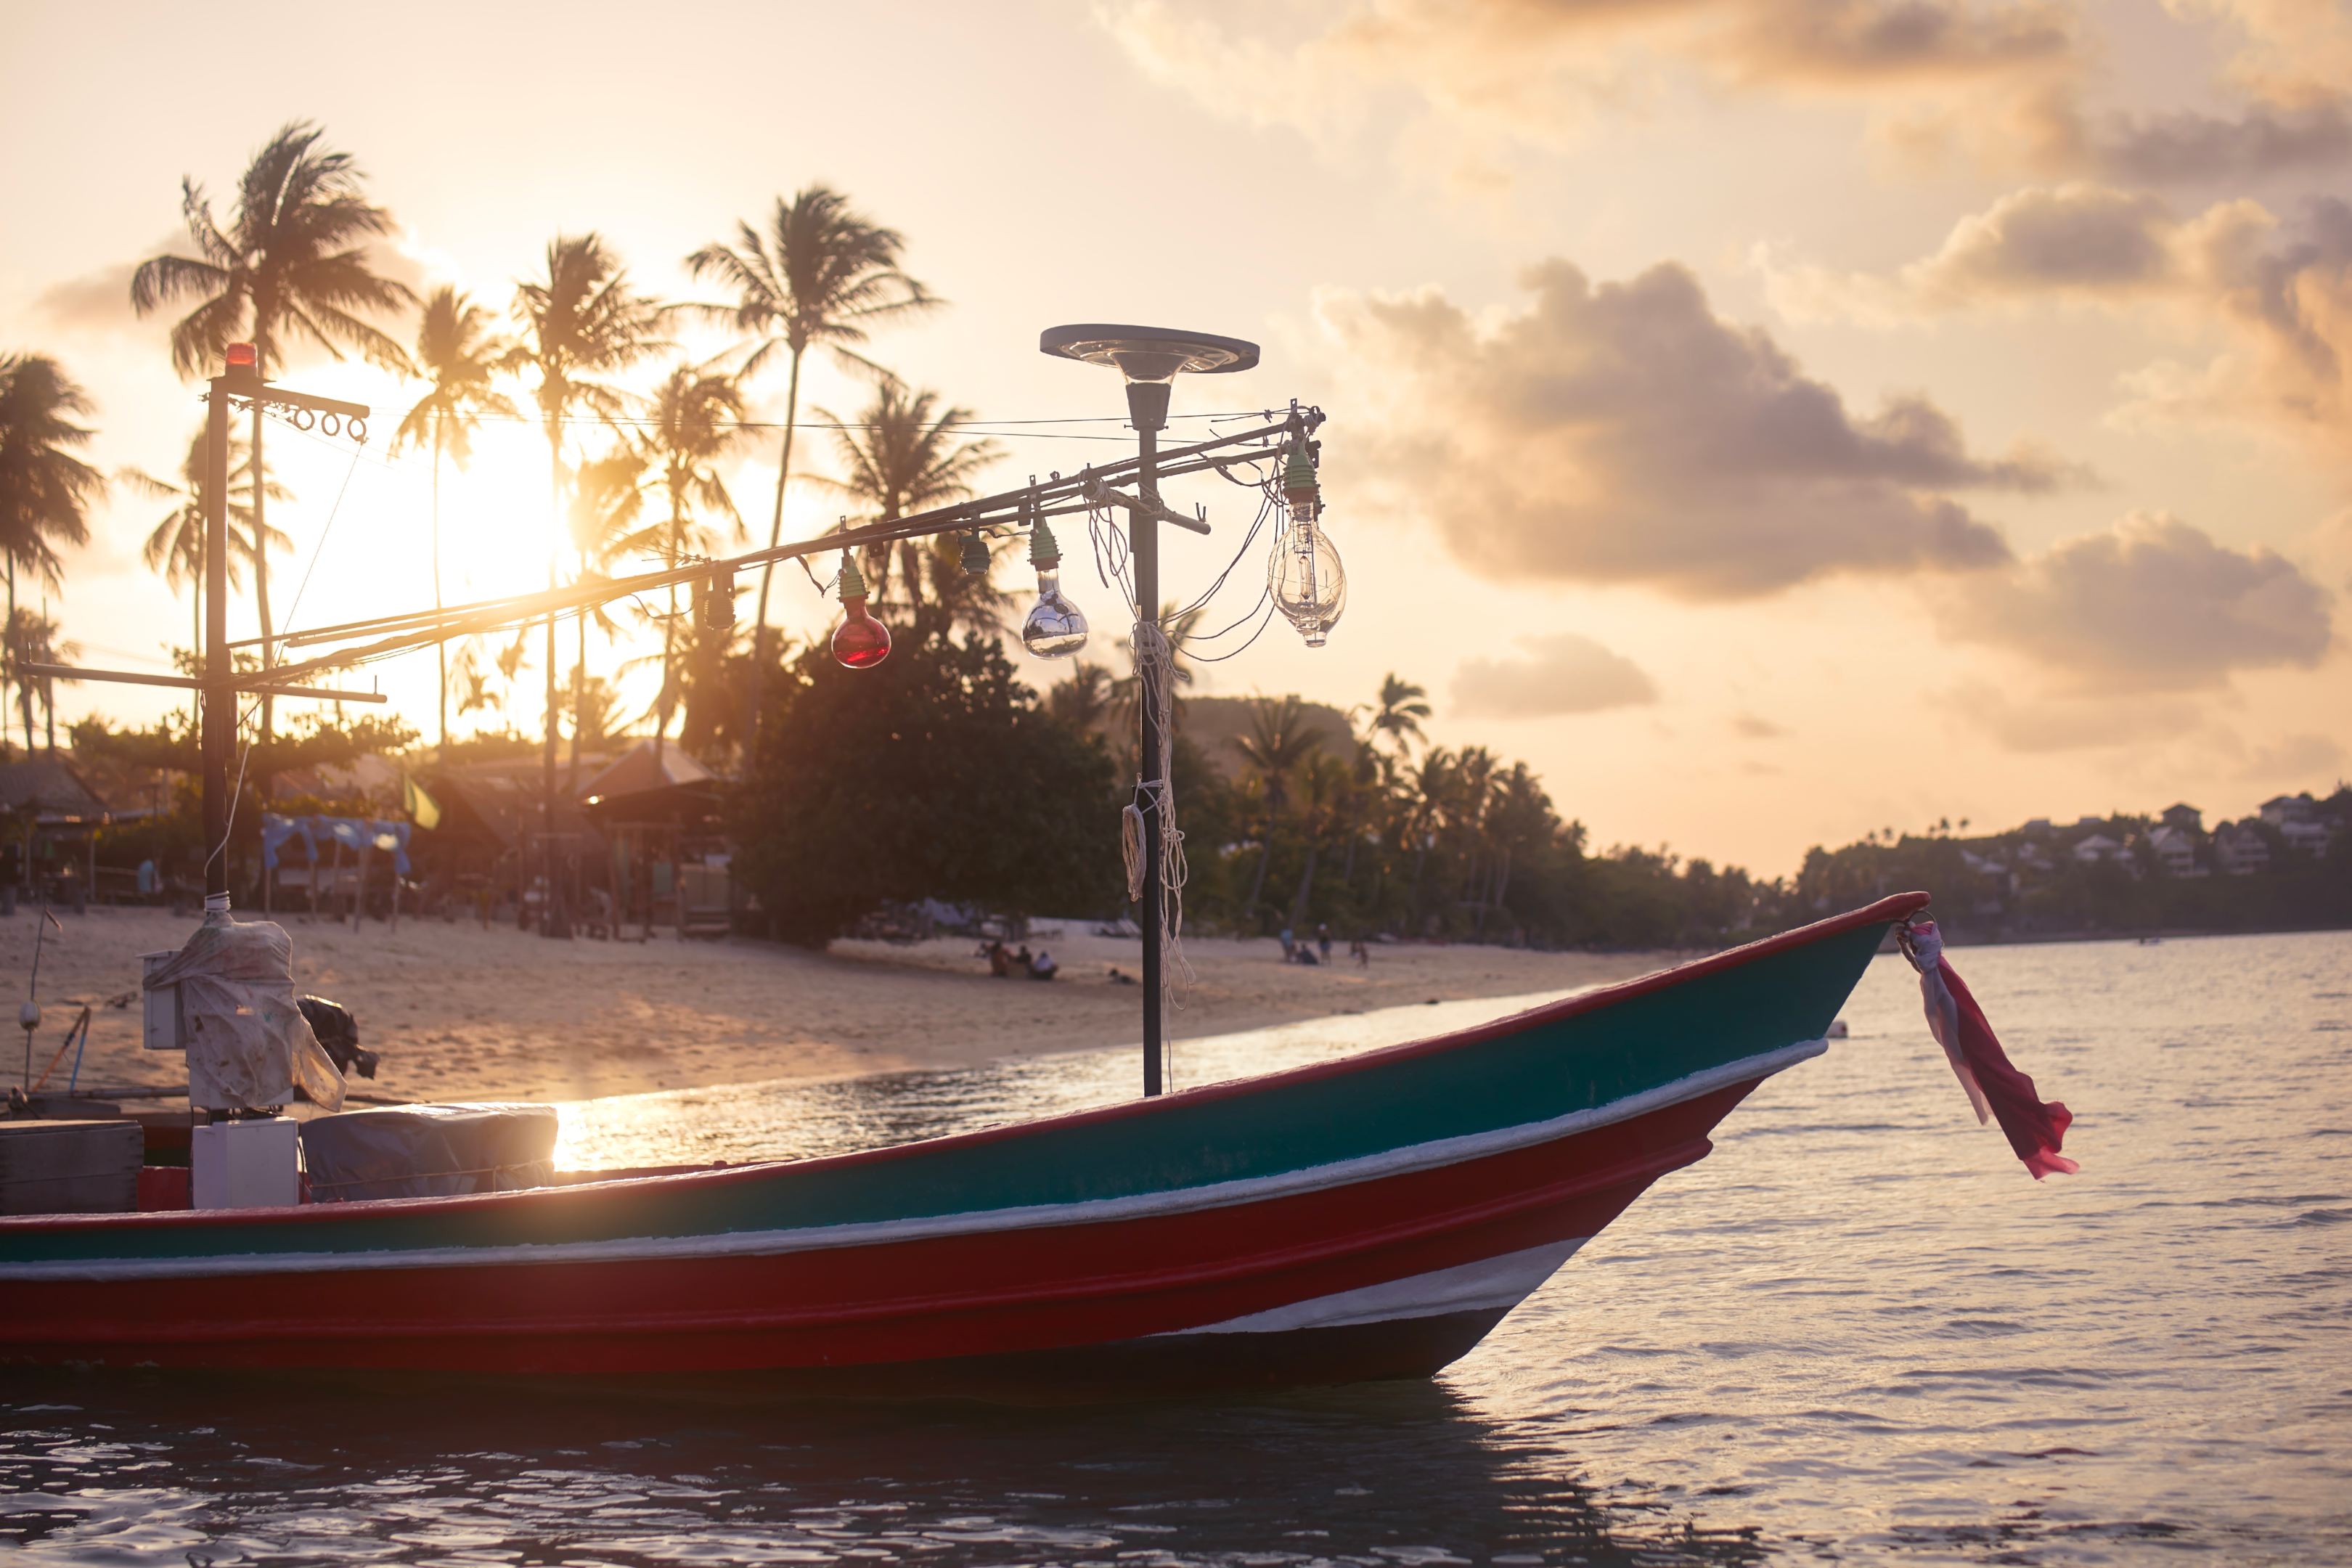 https://elements.envato.com/boat-near-idyllic-beach-with-palm-trees-at-sunset-YZG26B8